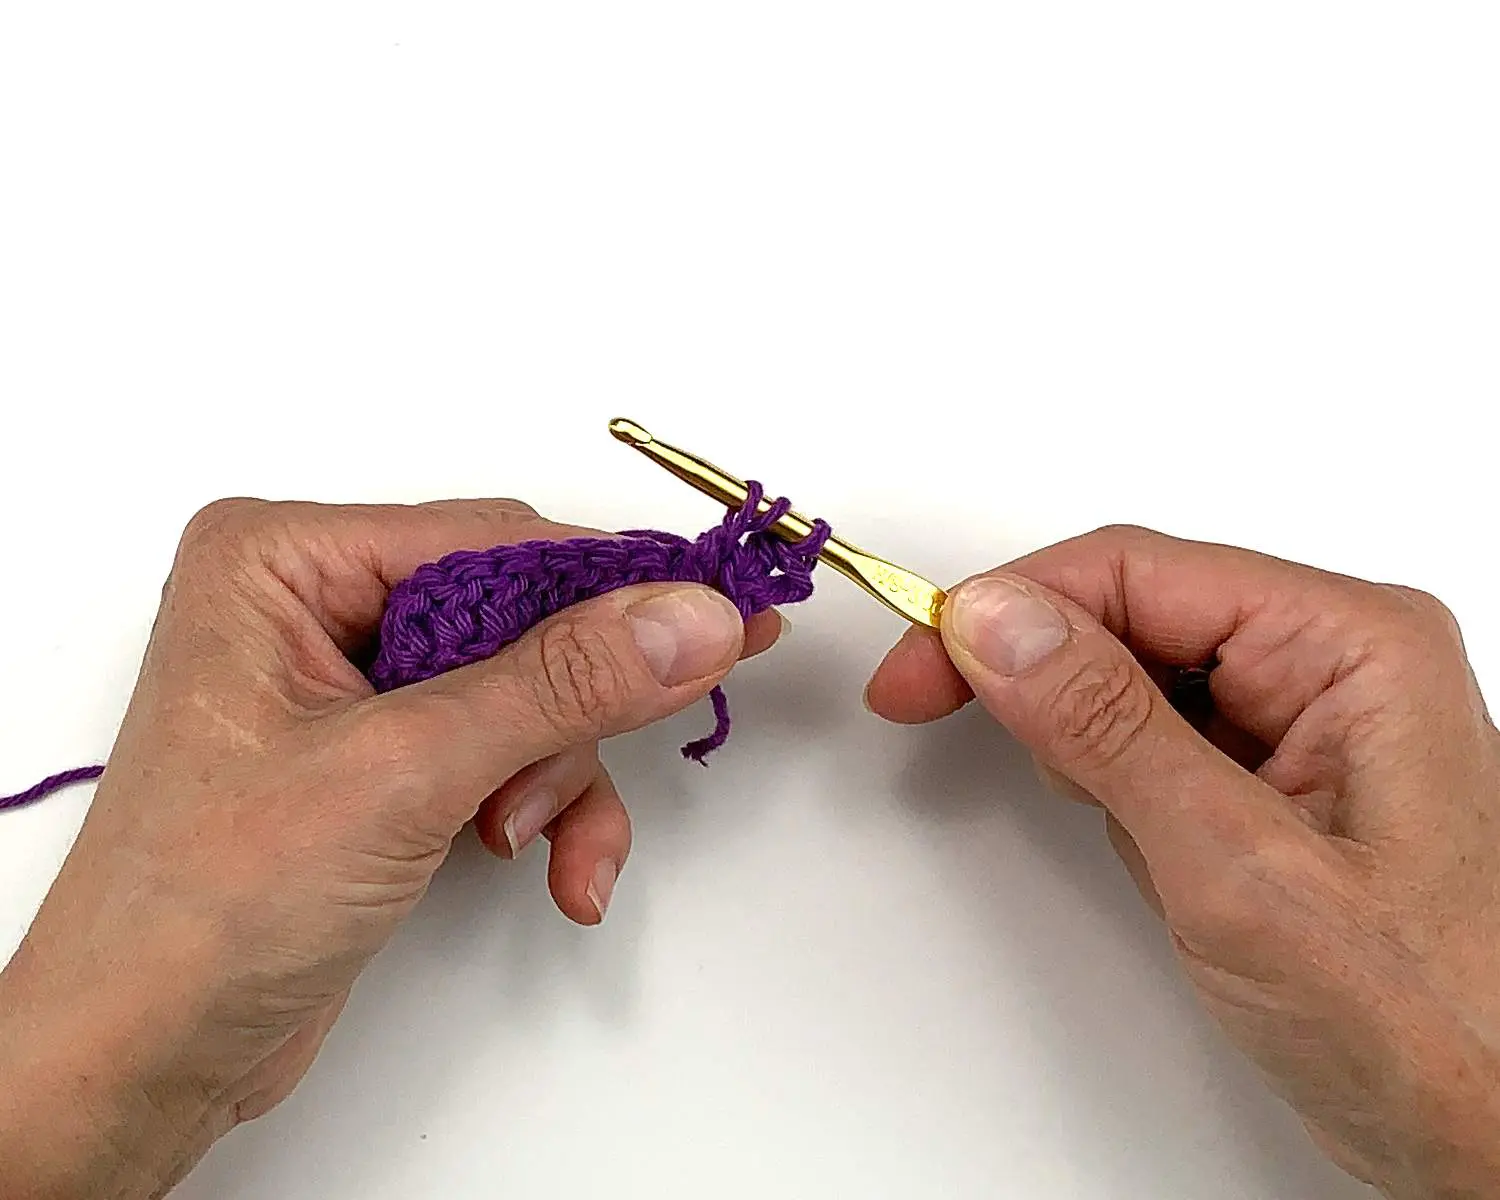 image of hands holding crochet work and a hook